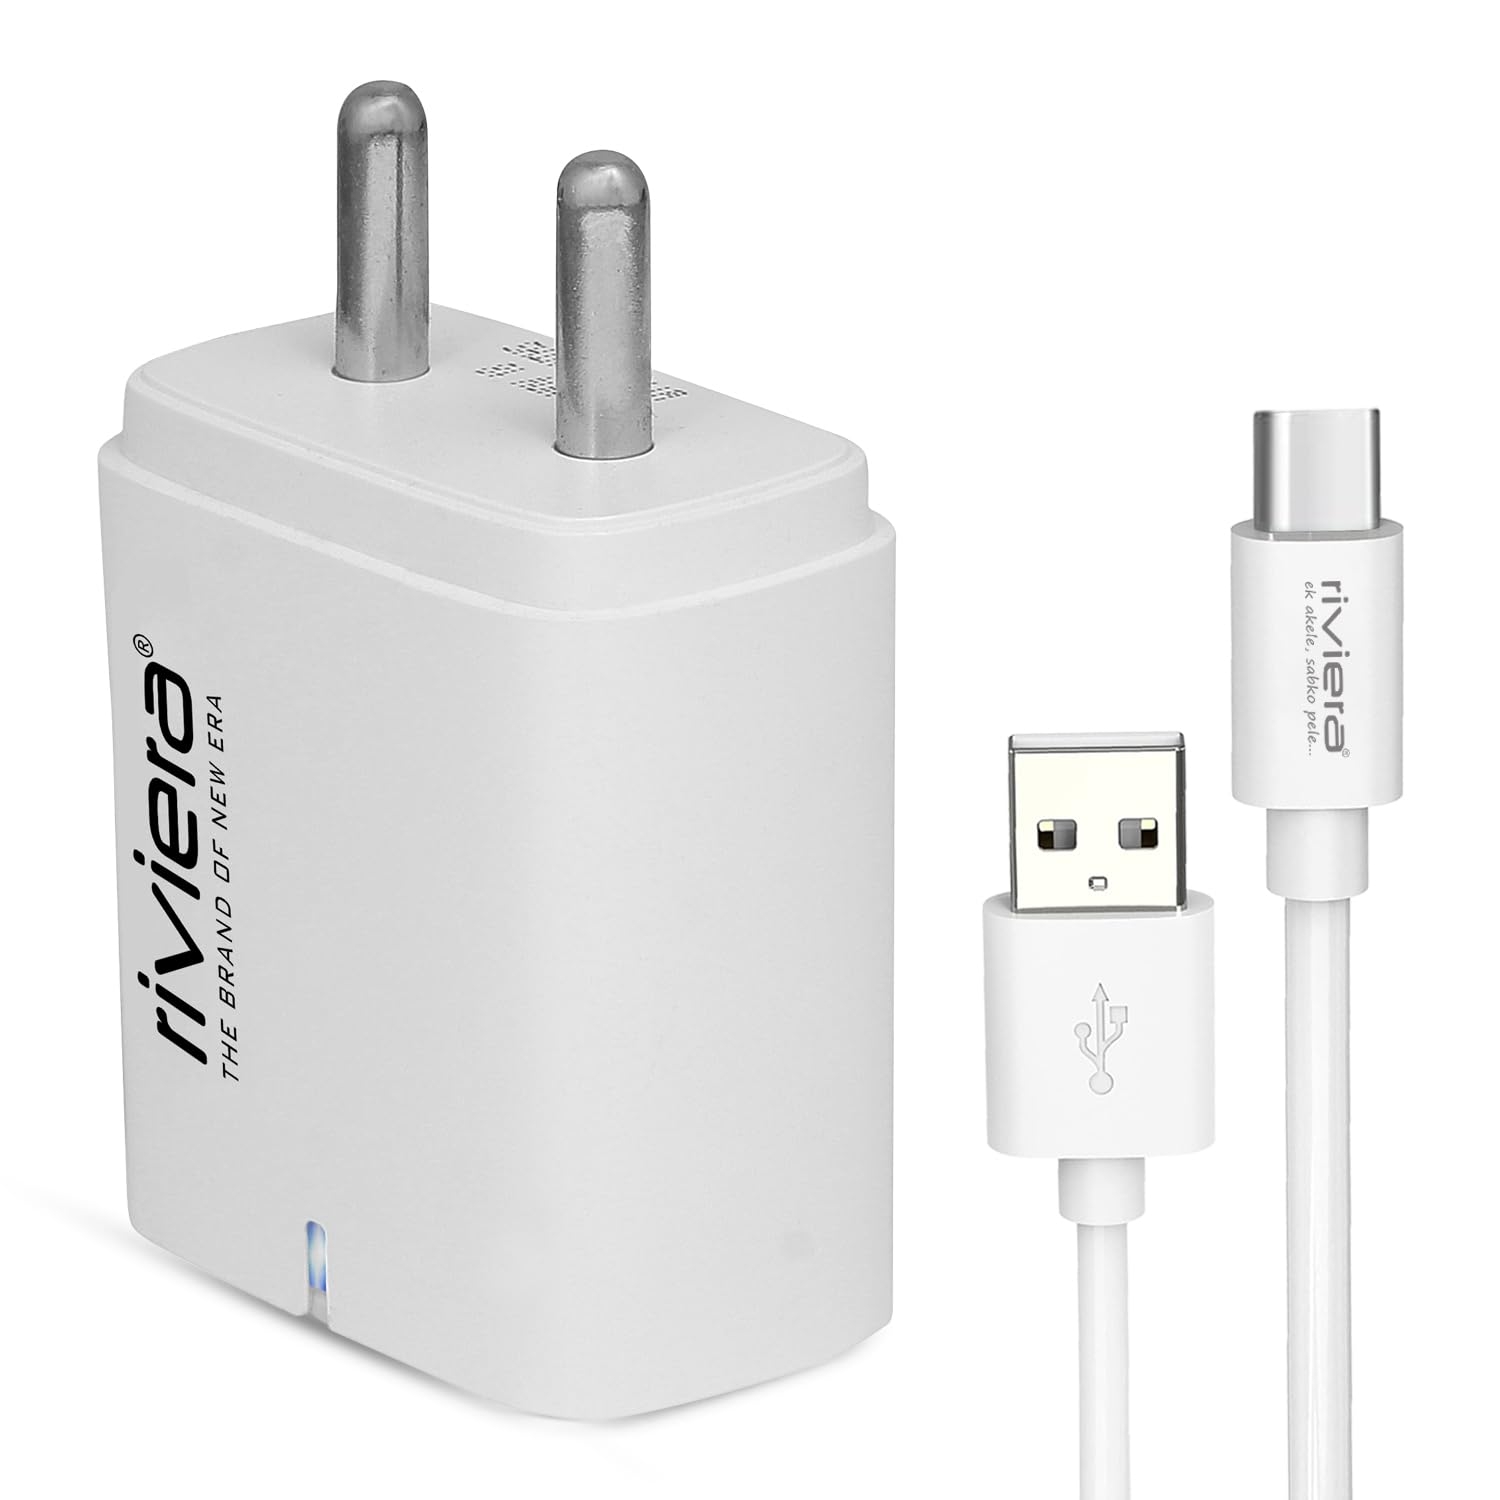 Riviera Booster Dual Port 10W USB Charger Adapter with Type C Cable, Multi-Layer, 2A Fast Charging Power Adaptor